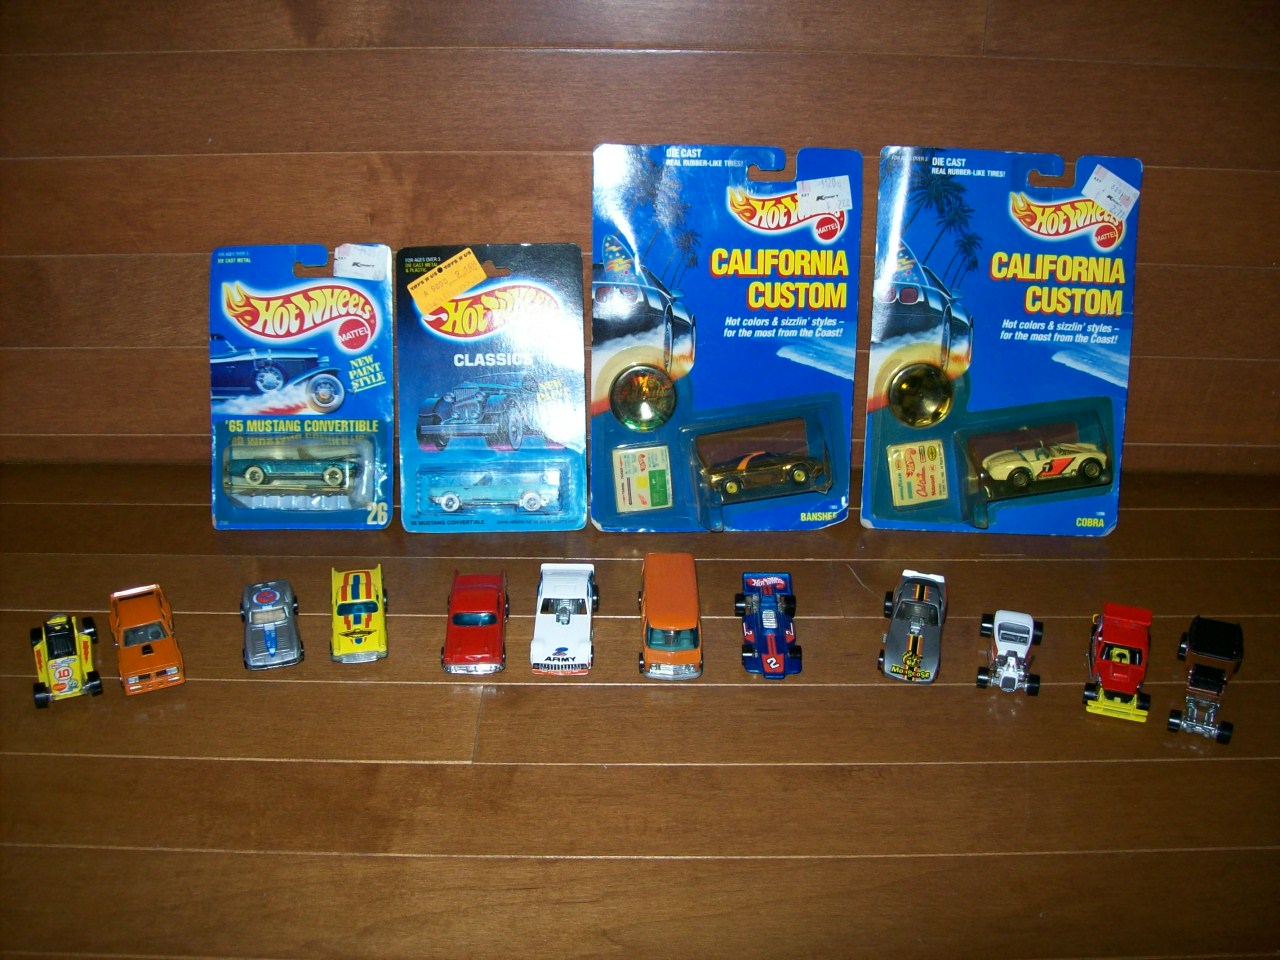 HOT WHEELS COLLECTION 16 CARS 4 NOS MOST 1970S W/ COLLECTOR CASE